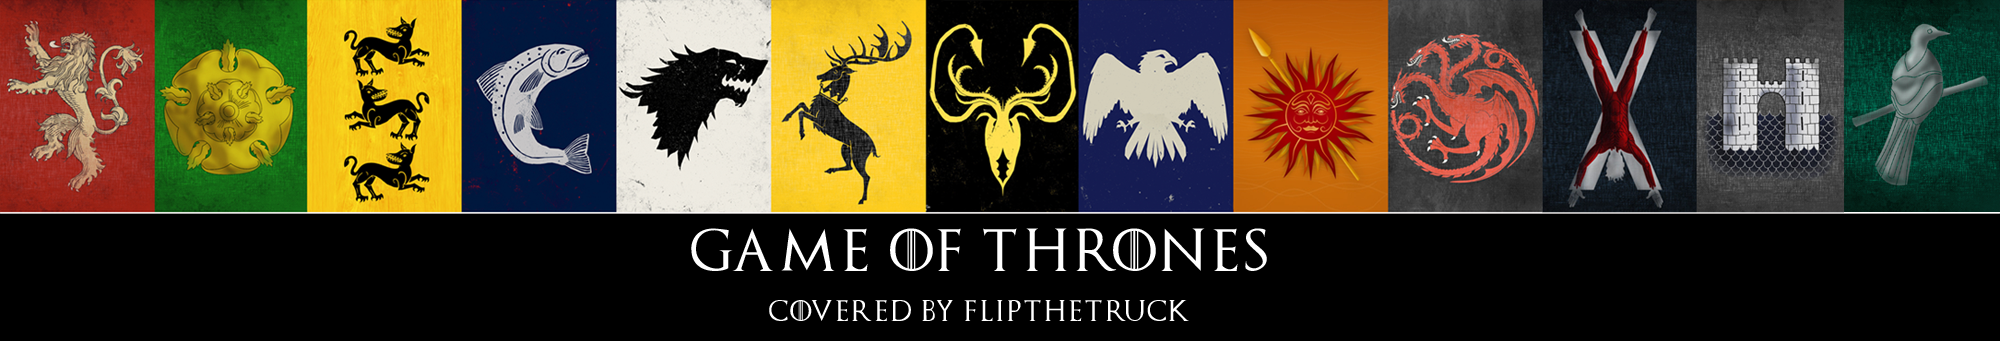 battle for the throne banner 2014